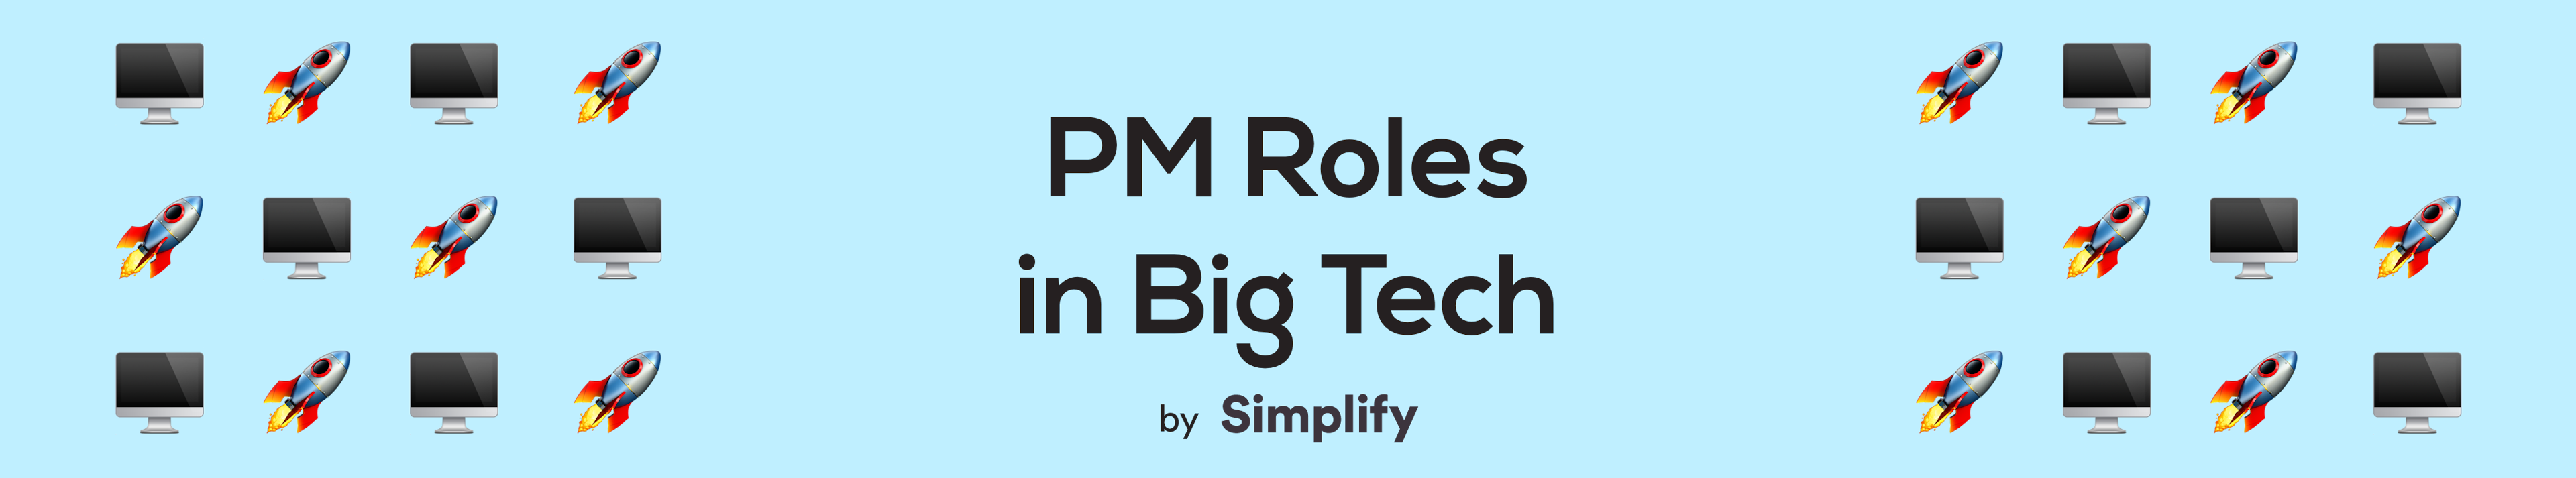 text that says “PM Roles in Big Tech by Simplify” surrounded by computer and rocketship emojis